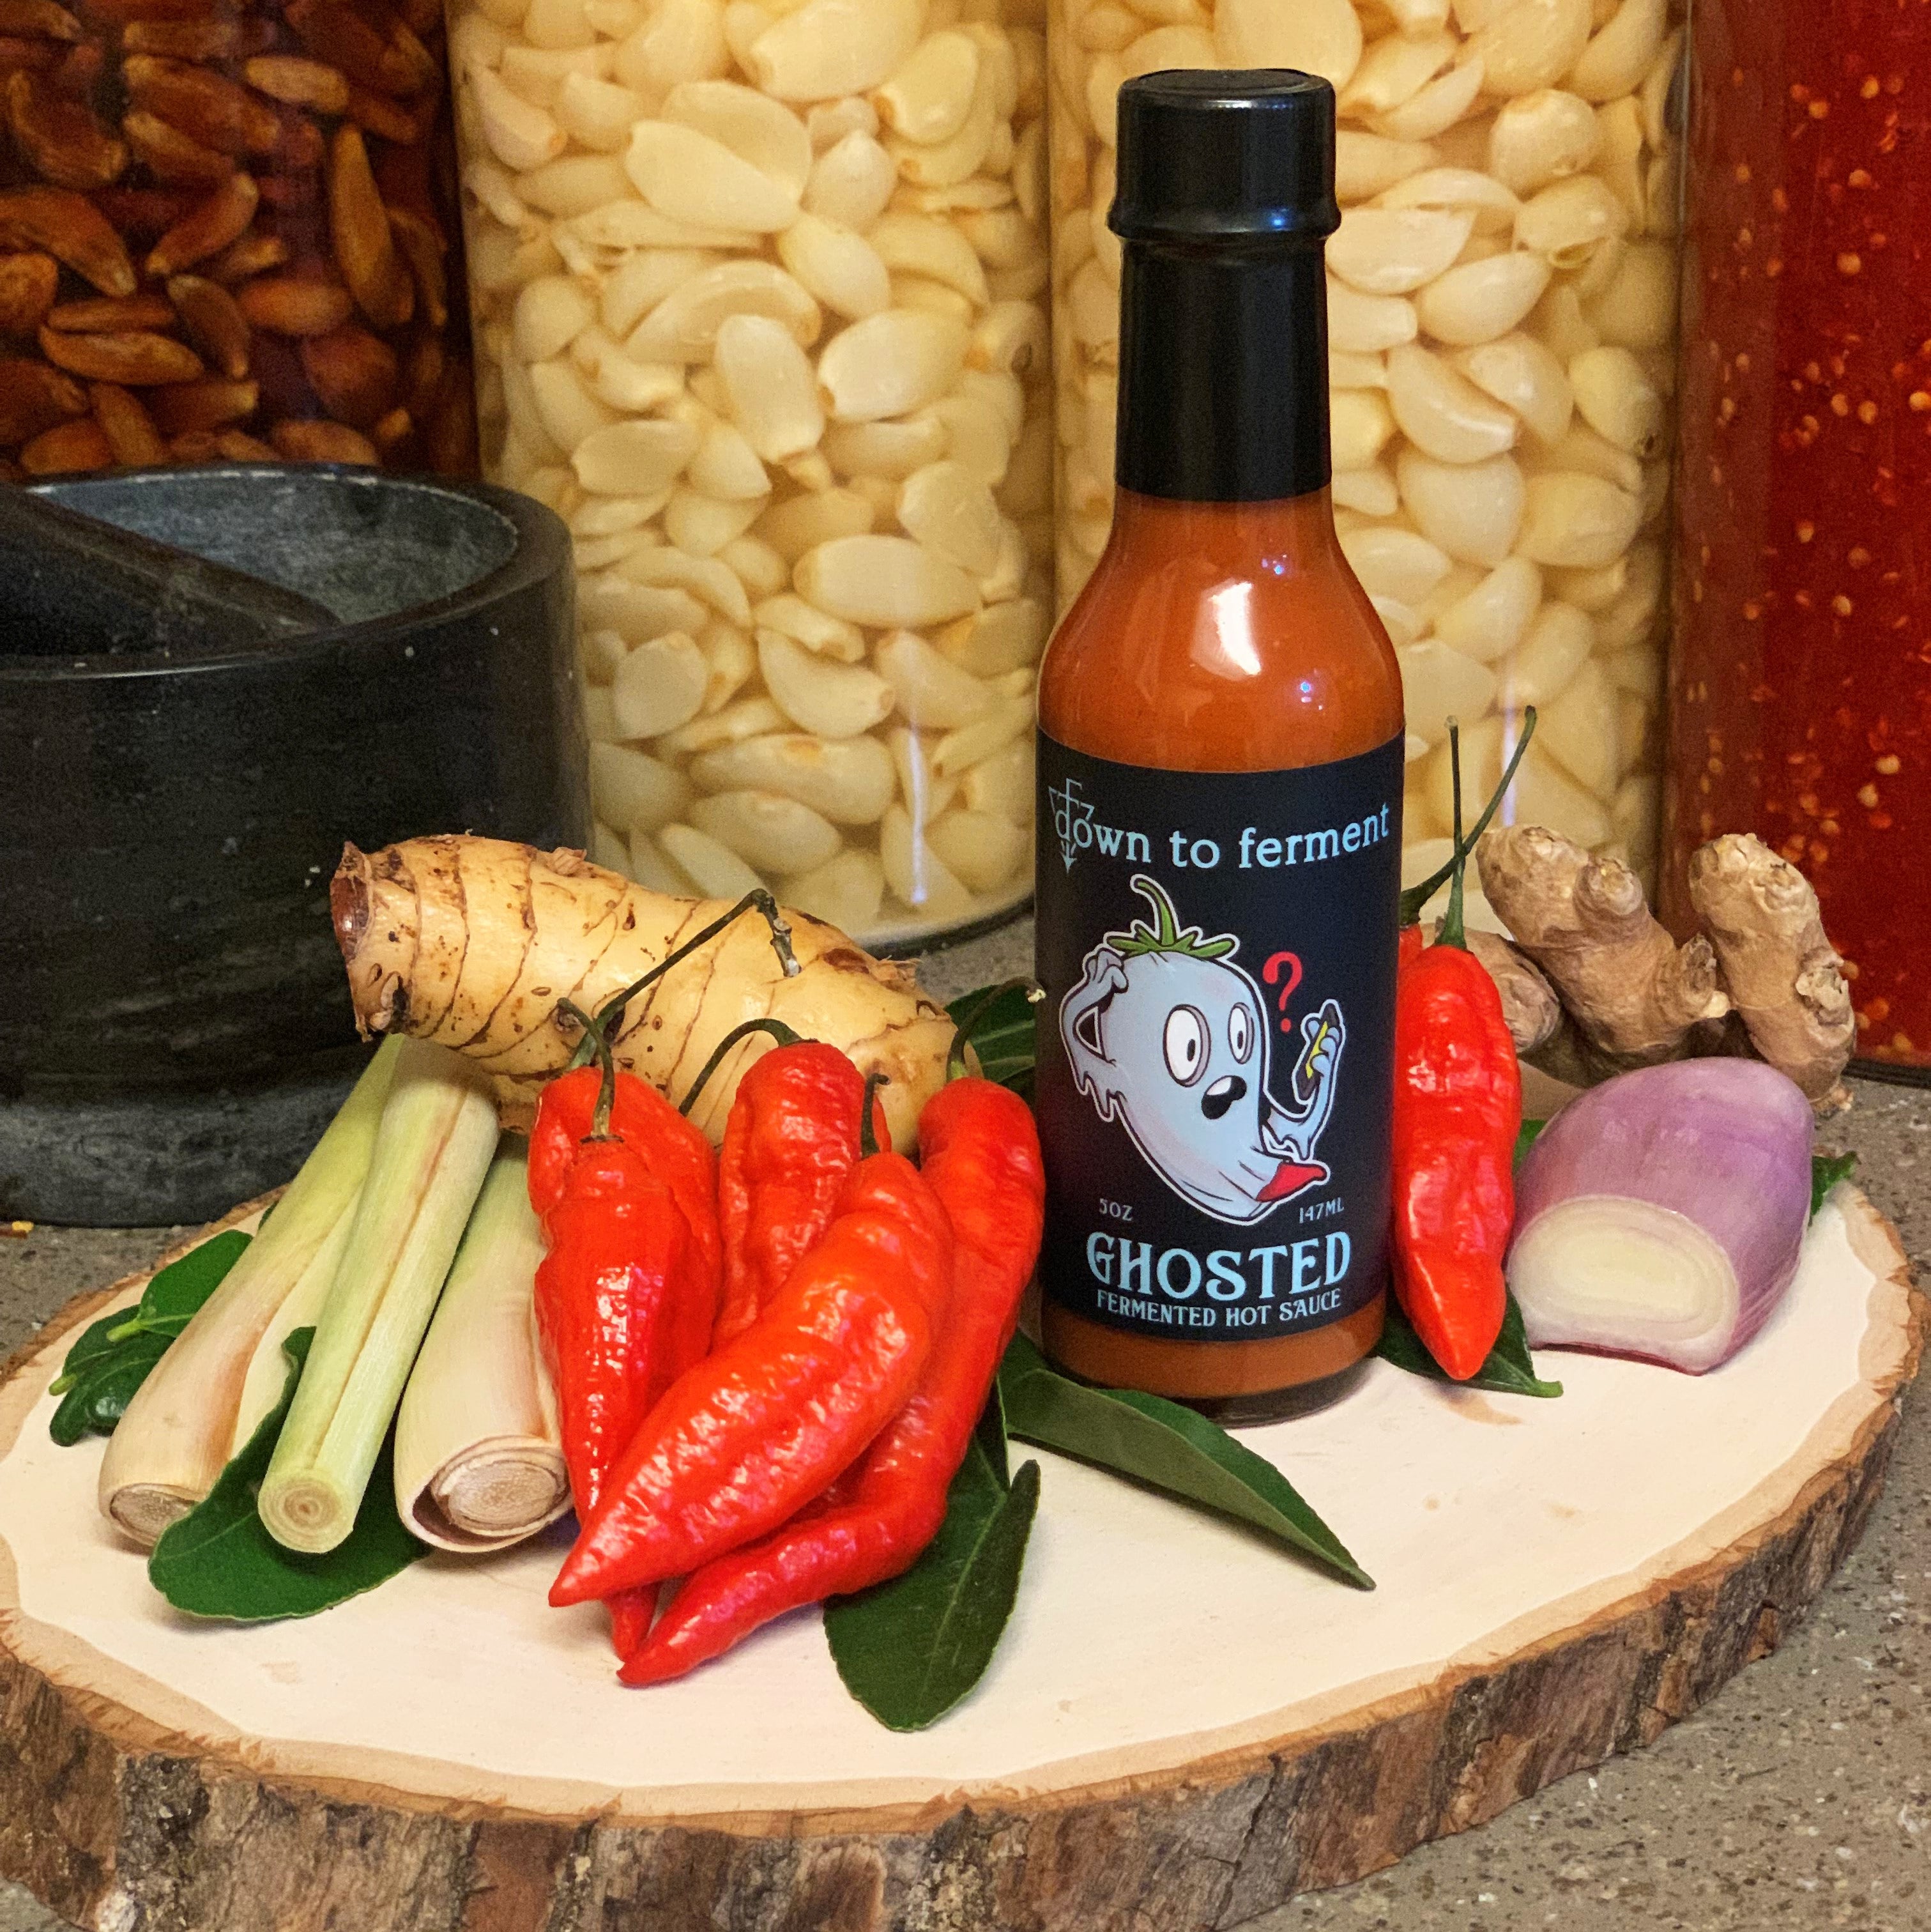 Ghosted Fermented Hot Sauce ingredients.  Galangal, ghost peppers, shallots, keffir lime leaves, ginger. San Diego's Hot Sauce